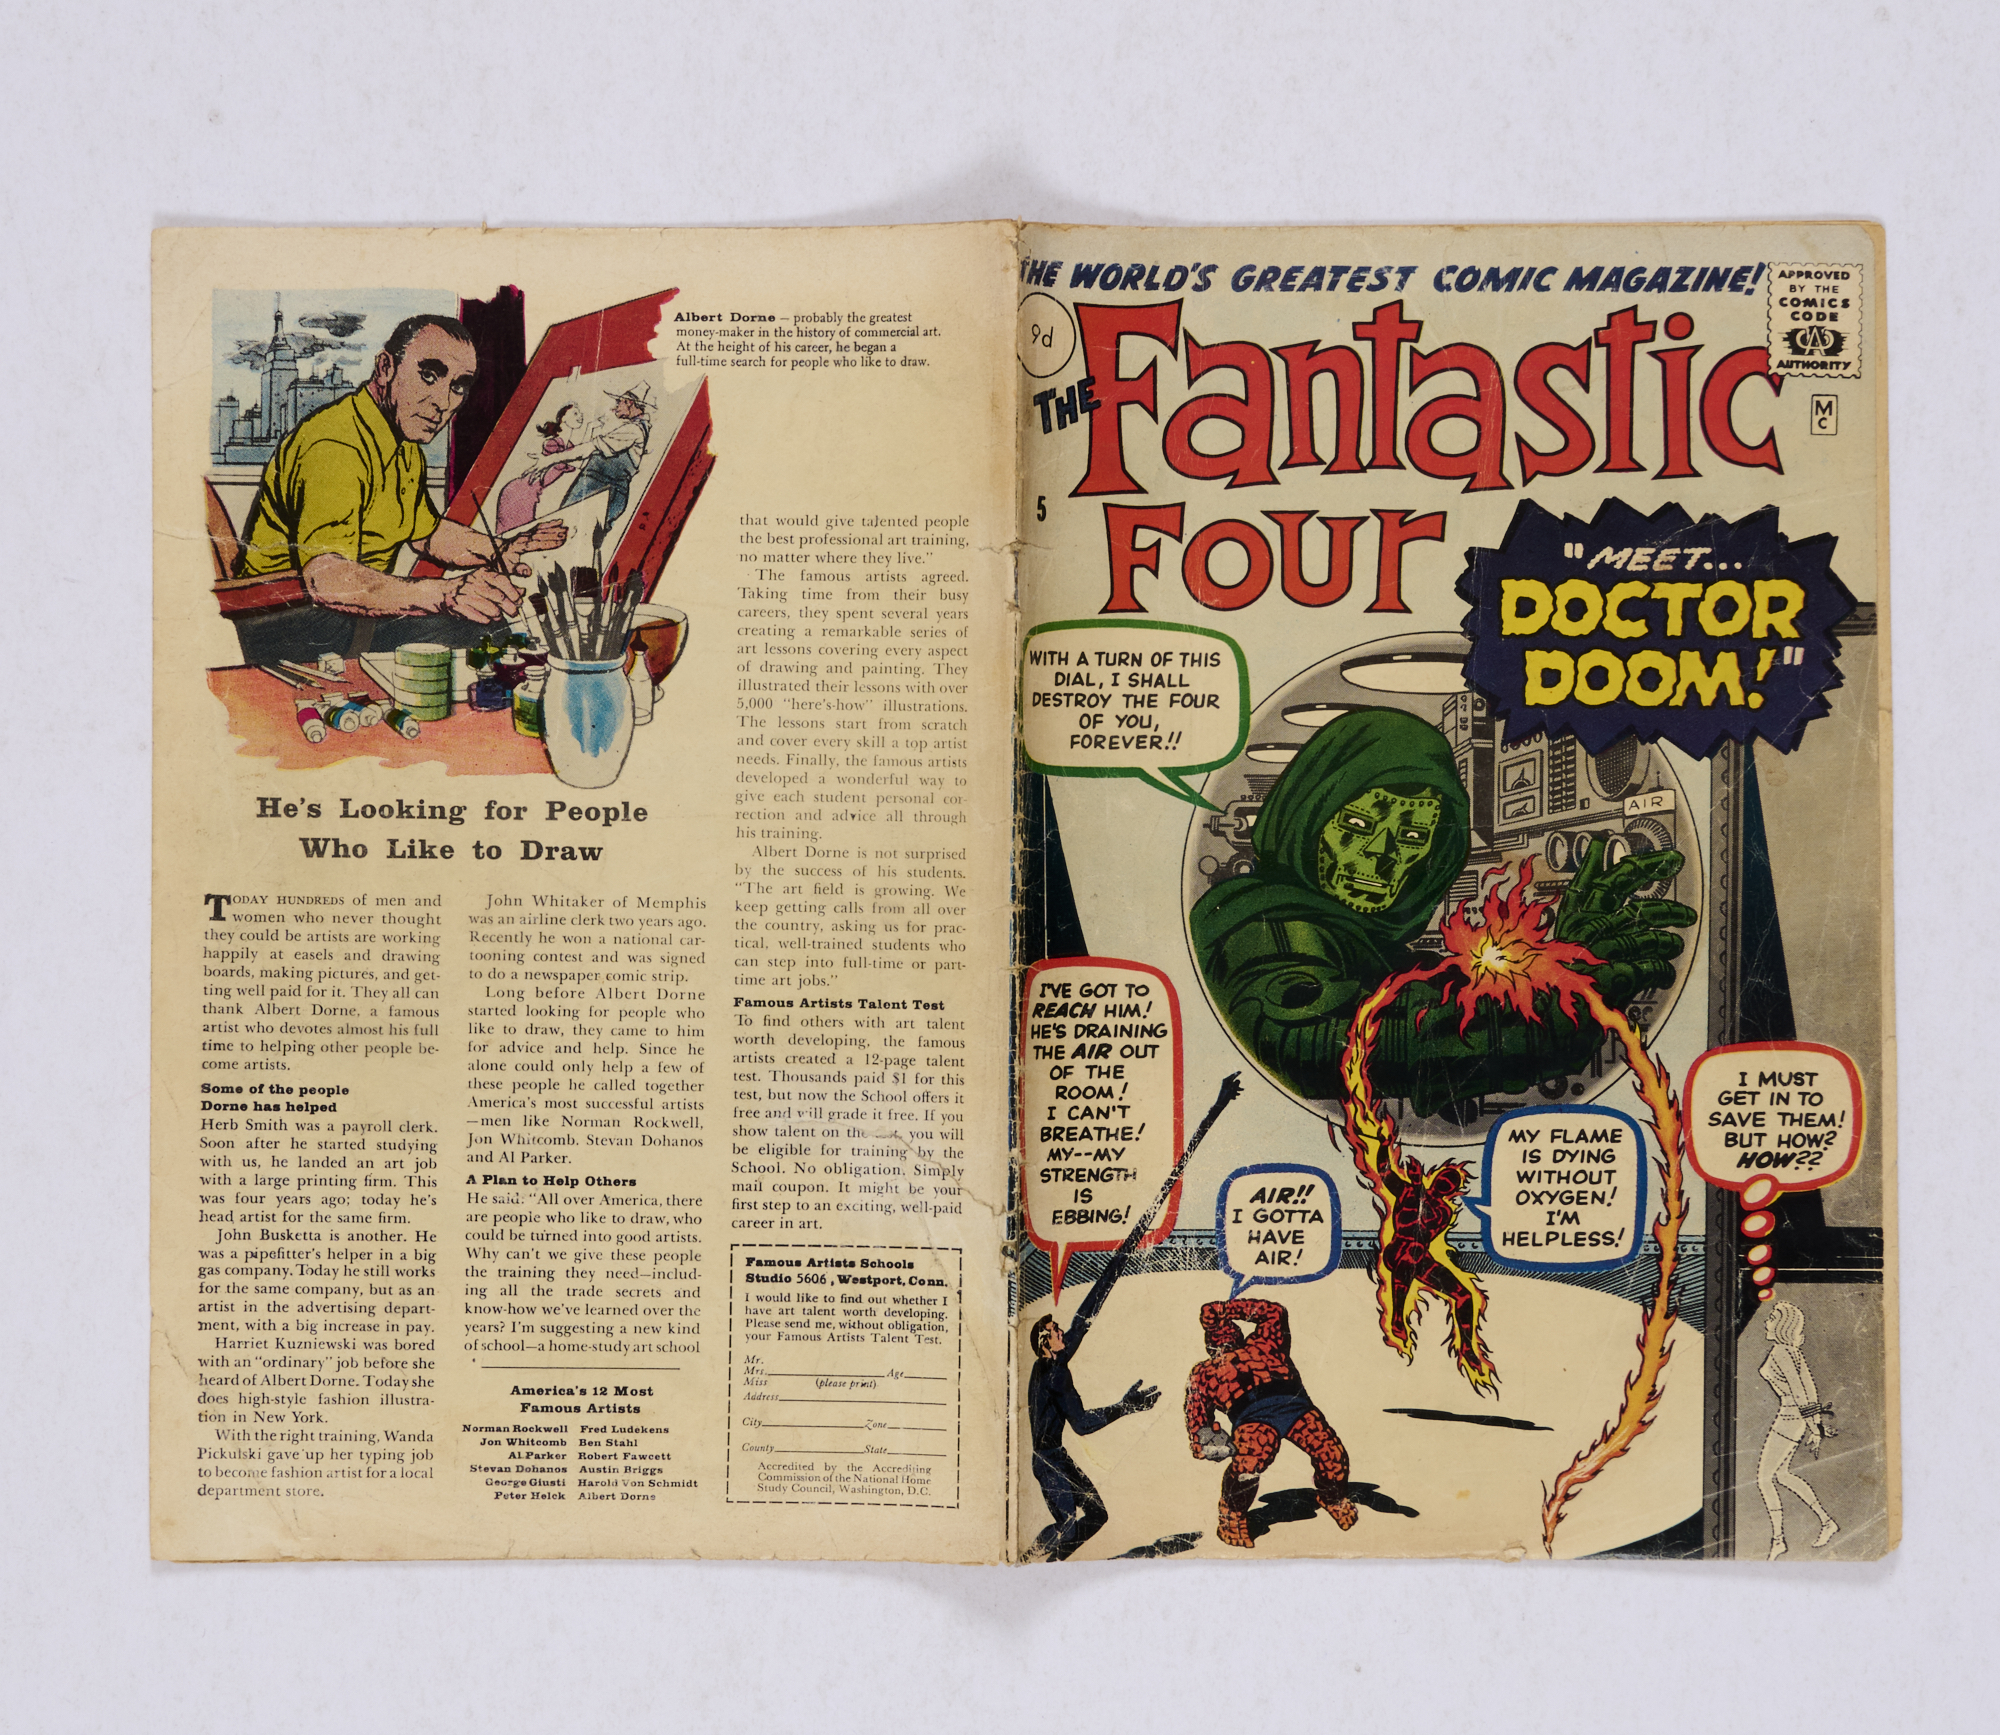 Fantastic Four 5 (1962) Full page ad for Hulk # 1. Cover re-attached to clear-taped interior spine - Image 2 of 7